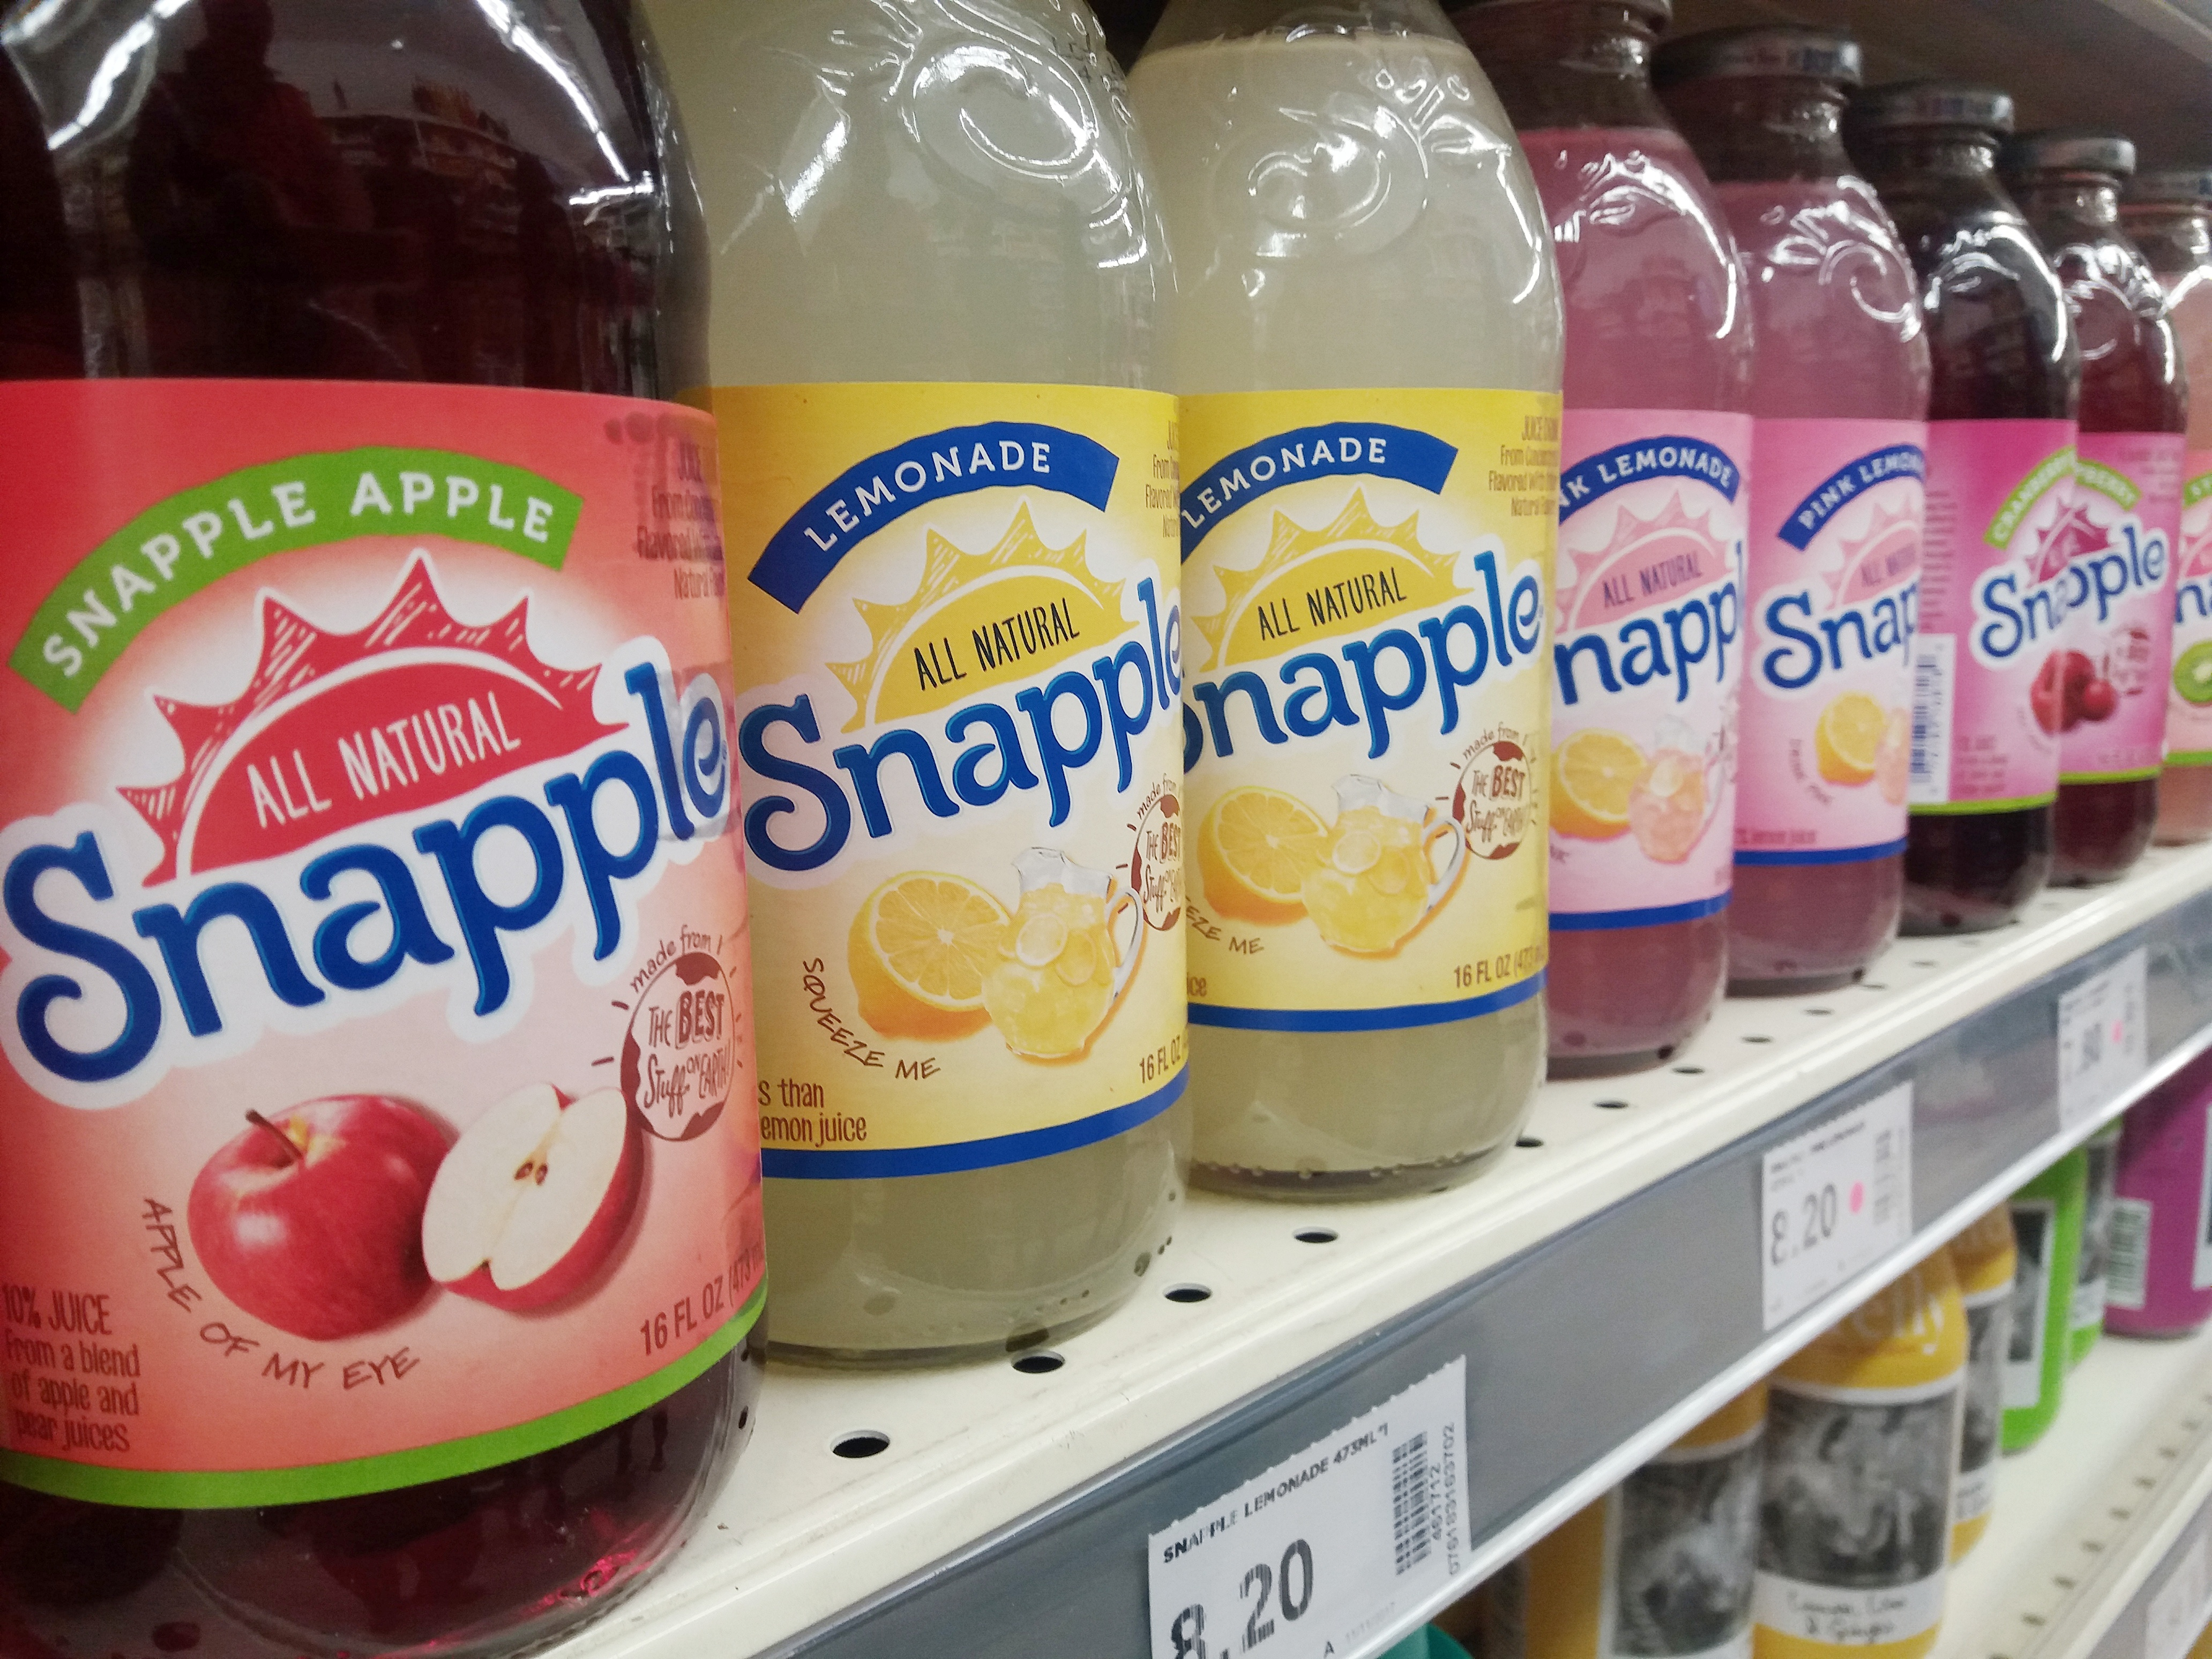 A shelf displaying various Snapple juice drinks | Source: Shutterstock